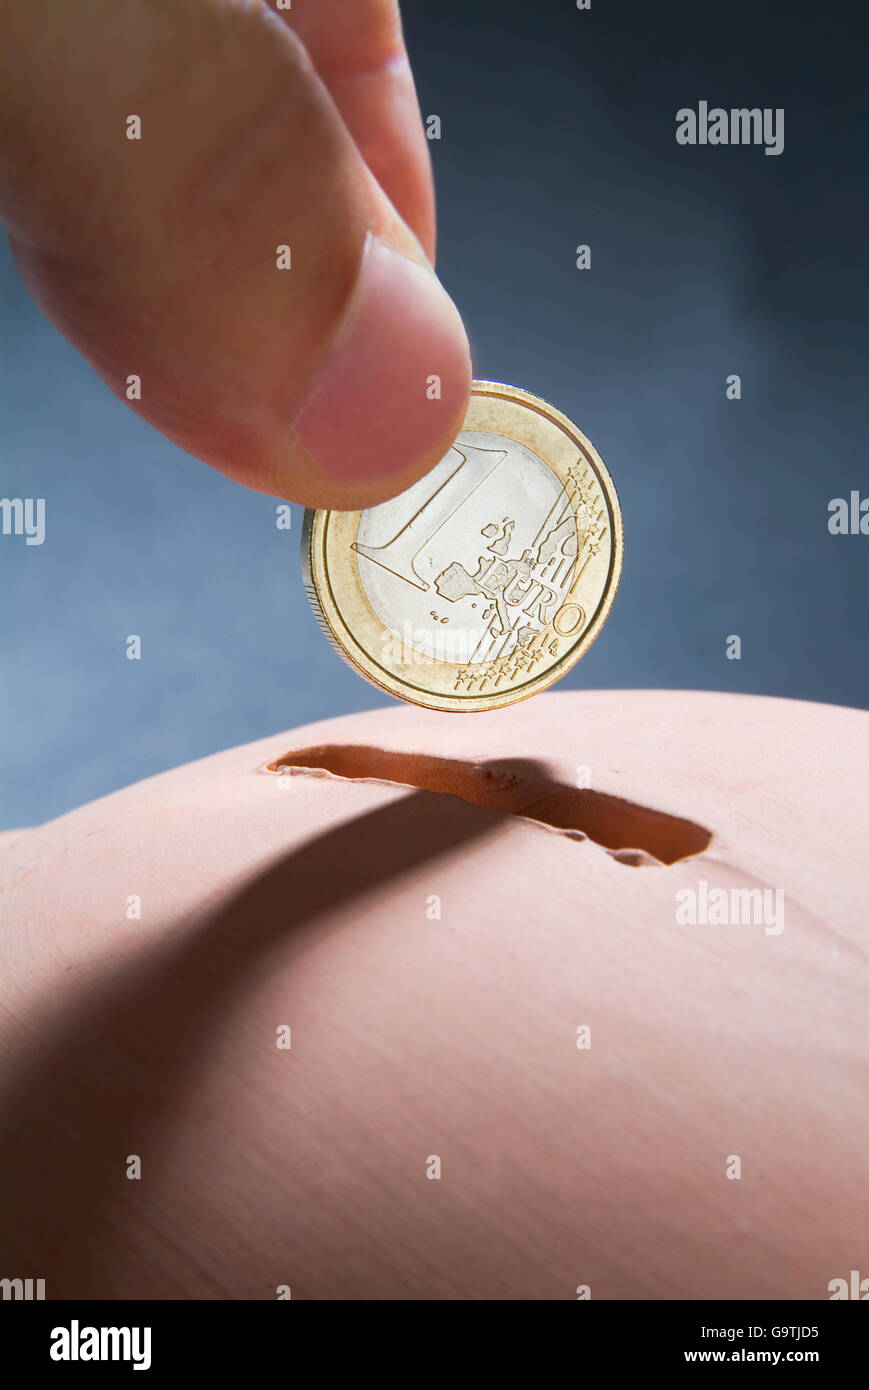 Two fingers clutching a one euro coin to insert it into the slot of a piggy bank Stock Photo